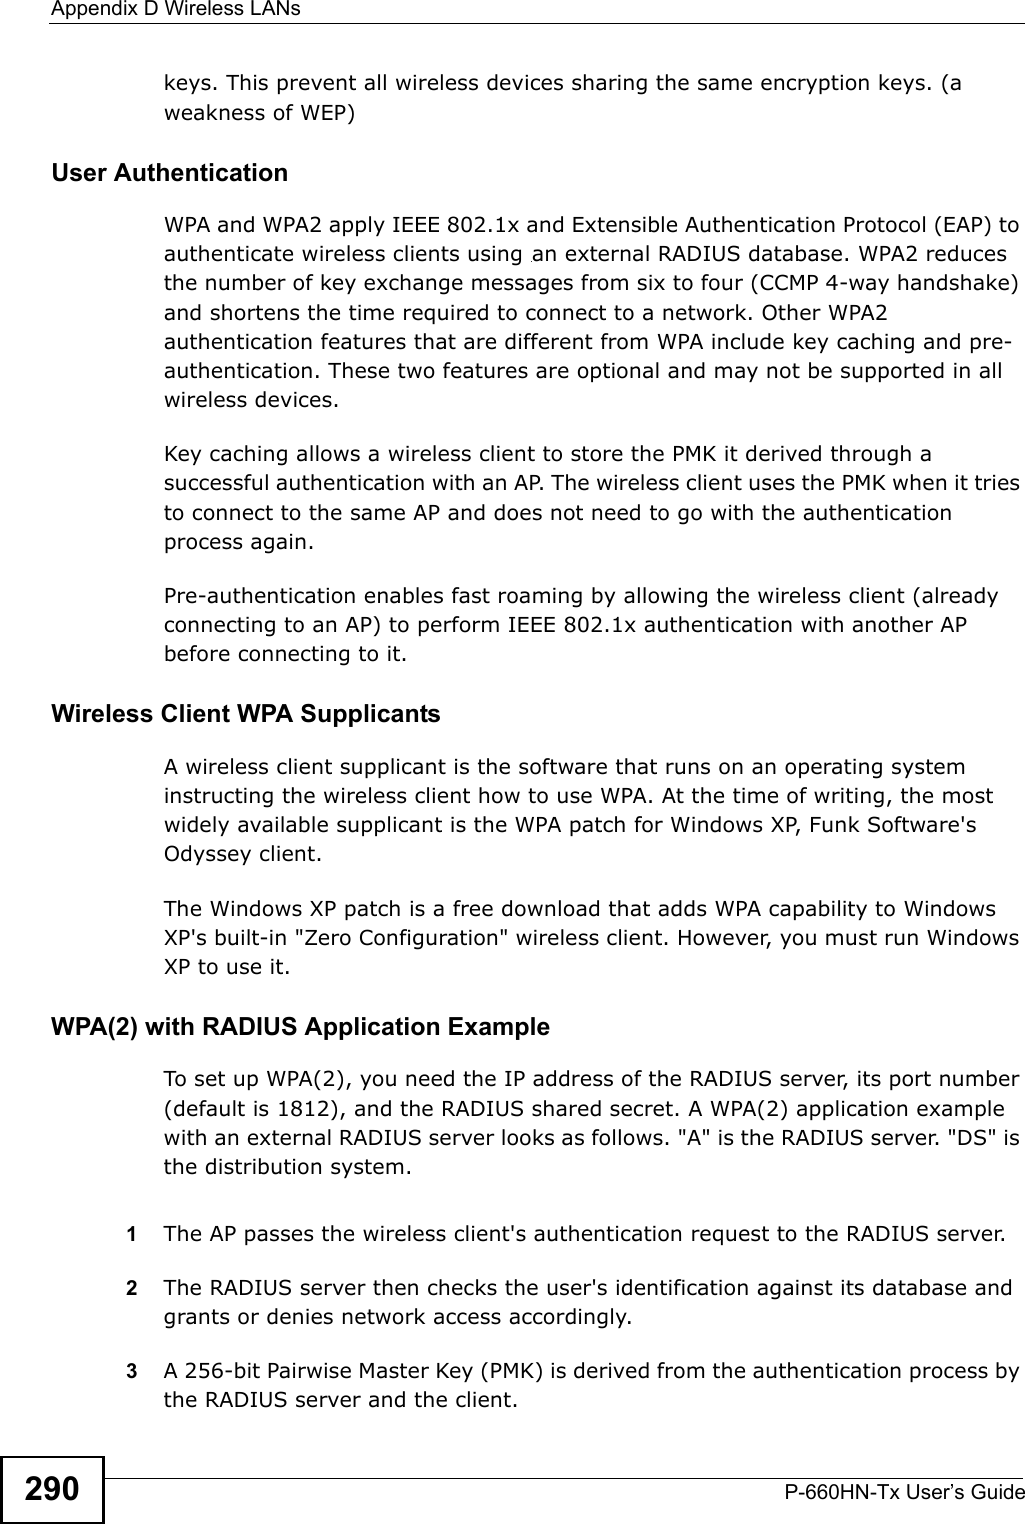 Appendix D Wireless LANsP-660HN-Tx User’s Guide290keys. This prevent all wireless devices sharing the same encryption keys. (a weakness of WEP)User Authentication WPA and WPA2 apply IEEE 802.1x and Extensible Authentication Protocol (EAP) to authenticate wireless clients using an external RADIUS database. WPA2 reduces the number of key exchange messages from six to four (CCMP 4-way handshake) and shortens the time required to connect to a network. Other WPA2 authentication features that are different from WPA include key caching and pre-authentication. These two features are optional and may not be supported in all wireless devices.Key caching allows a wireless client to store the PMK it derived through a successful authentication with an AP. The wireless client uses the PMK when it tries to connect to the same AP and does not need to go with the authentication process again.Pre-authentication enables fast roaming by allowing the wireless client (already connecting to an AP) to perform IEEE 802.1x authentication with another AP before connecting to it.Wireless Client WPA SupplicantsA wireless client supplicant is the software that runs on an operating system instructing the wireless client how to use WPA. At the time of writing, the most widely available supplicant is the WPA patch for Windows XP, Funk Software&apos;s Odyssey client. The Windows XP patch is a free download that adds WPA capability to Windows XP&apos;s built-in &quot;Zero Configuration&quot; wireless client. However, you must run Windows XP to use it. WPA(2) with RADIUS Application ExampleTo set up WPA(2), you need the IP address of the RADIUS server, its port number (default is 1812), and the RADIUS shared secret. A WPA(2) application example with an external RADIUS server looks as follows. &quot;A&quot; is the RADIUS server. &quot;DS&quot; is the distribution system.1The AP passes the wireless client&apos;s authentication request to the RADIUS server.2The RADIUS server then checks the user&apos;s identification against its database and grants or denies network access accordingly.3A 256-bit Pairwise Master Key (PMK) is derived from the authentication process by the RADIUS server and the client.